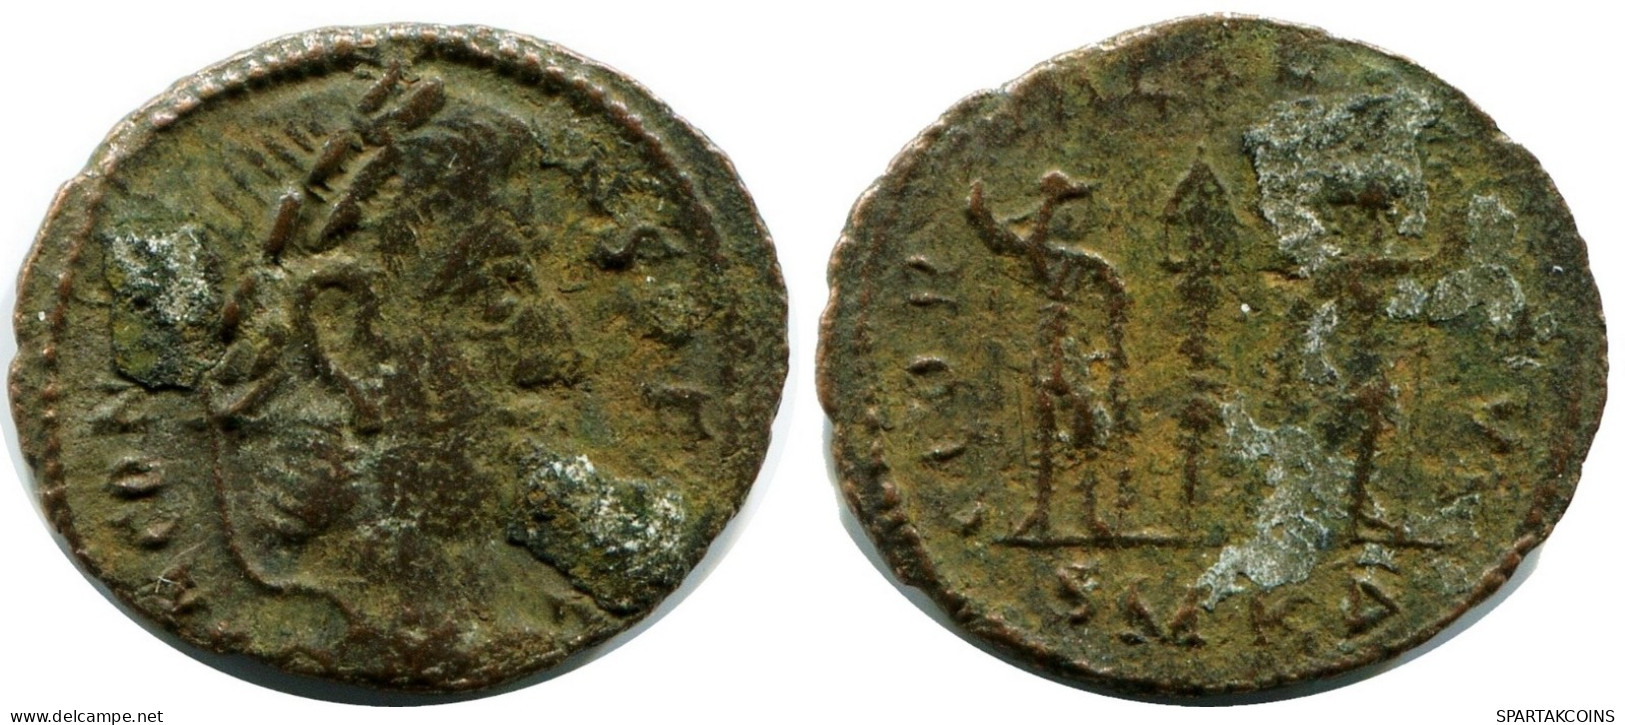 CONSTANS MINTED IN CYZICUS FROM THE ROYAL ONTARIO MUSEUM #ANC11631.14.F.A - L'Empire Chrétien (307 à 363)